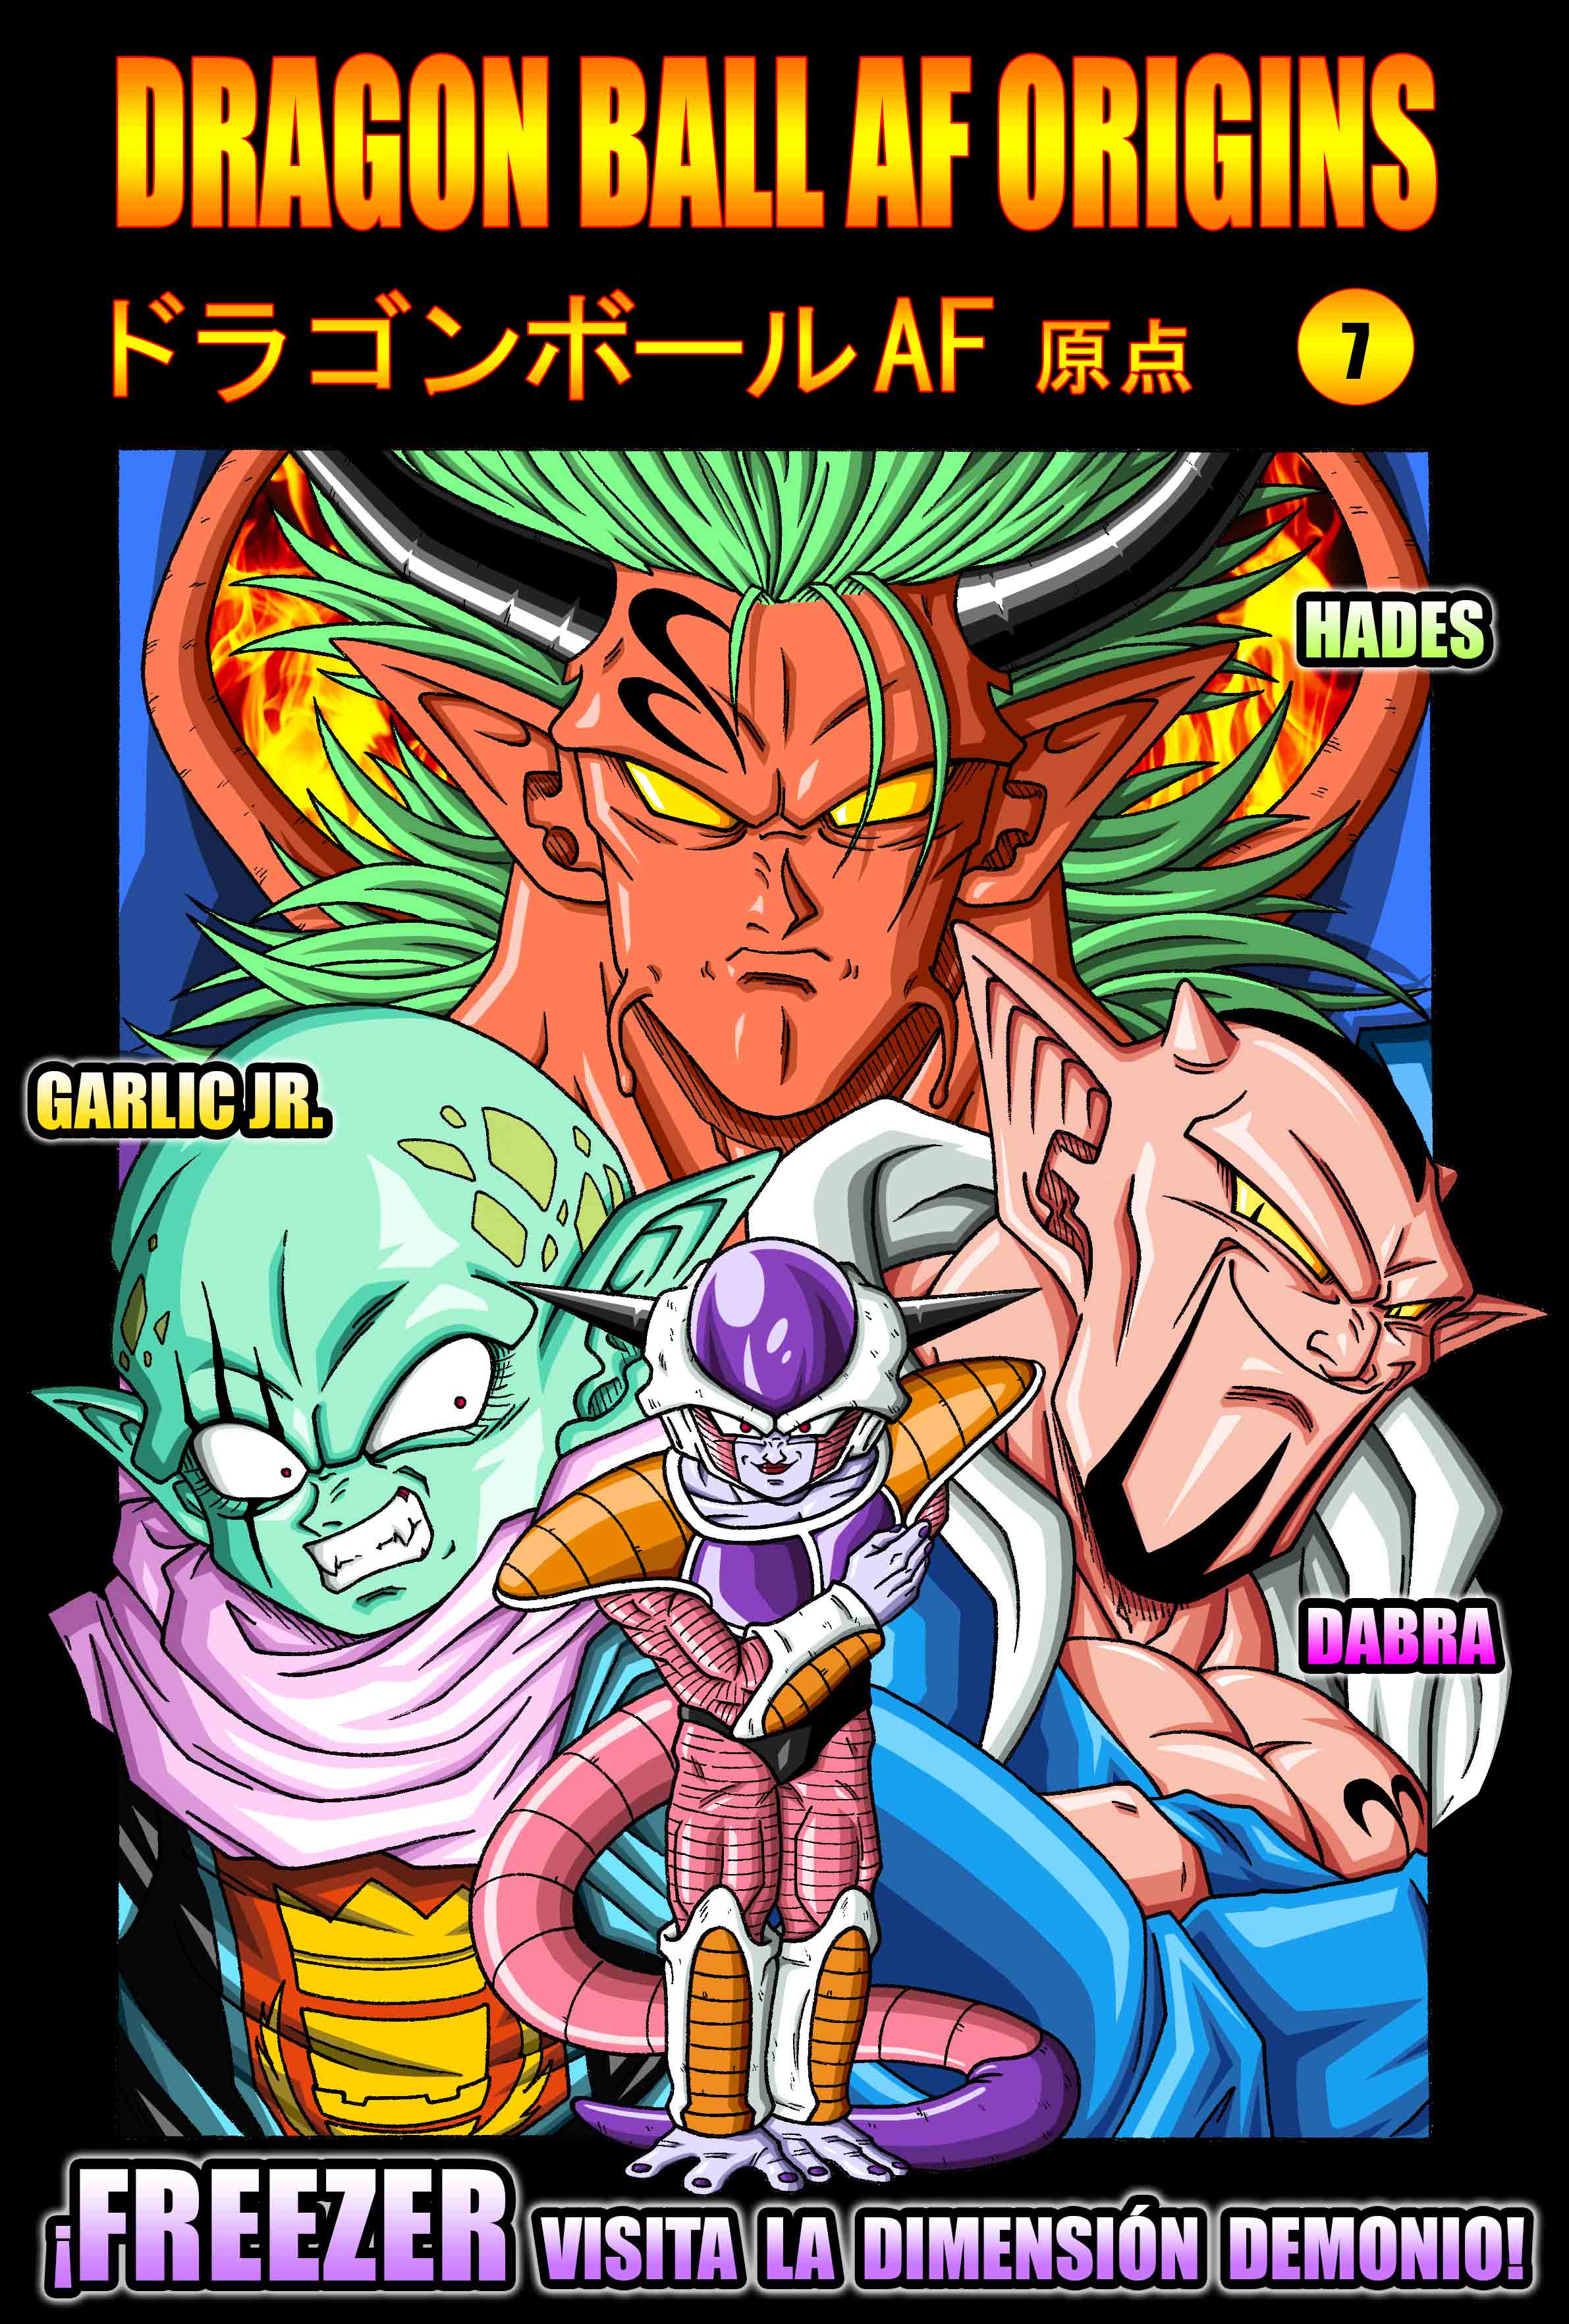 Tablos.AF 💫 on X: All the volumes of Dragon Ball #AF Origins #ONLINE and  #FREE in #ENGLISH! 🇬🇧 🇺🇸 🔺Link in my bio🔺  / X